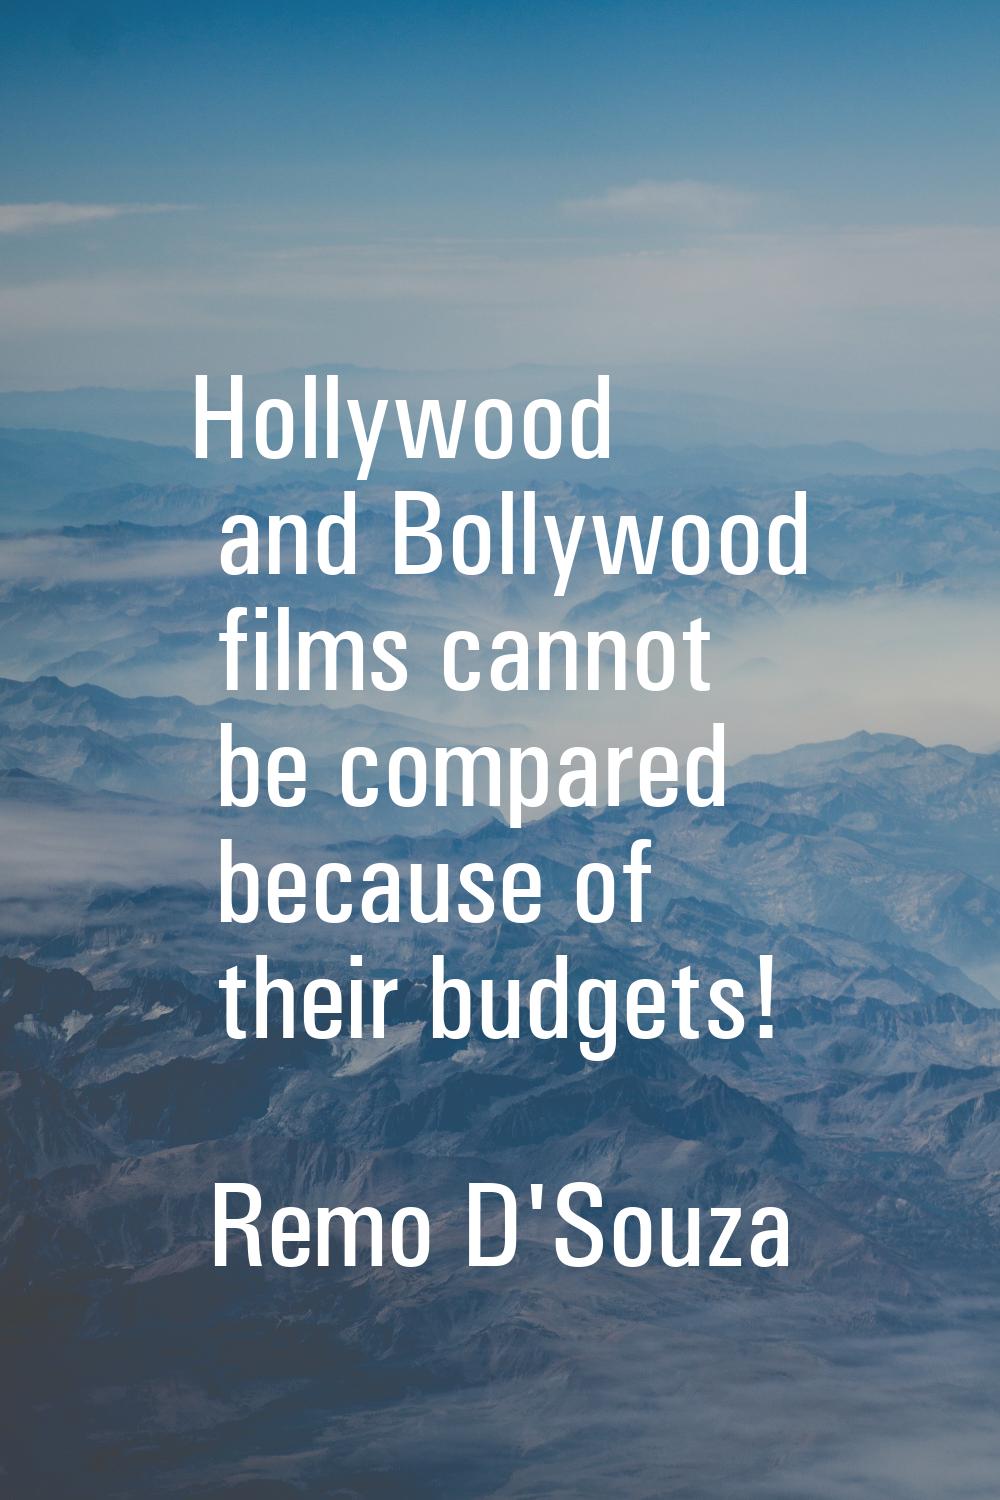 Hollywood and Bollywood films cannot be compared because of their budgets!